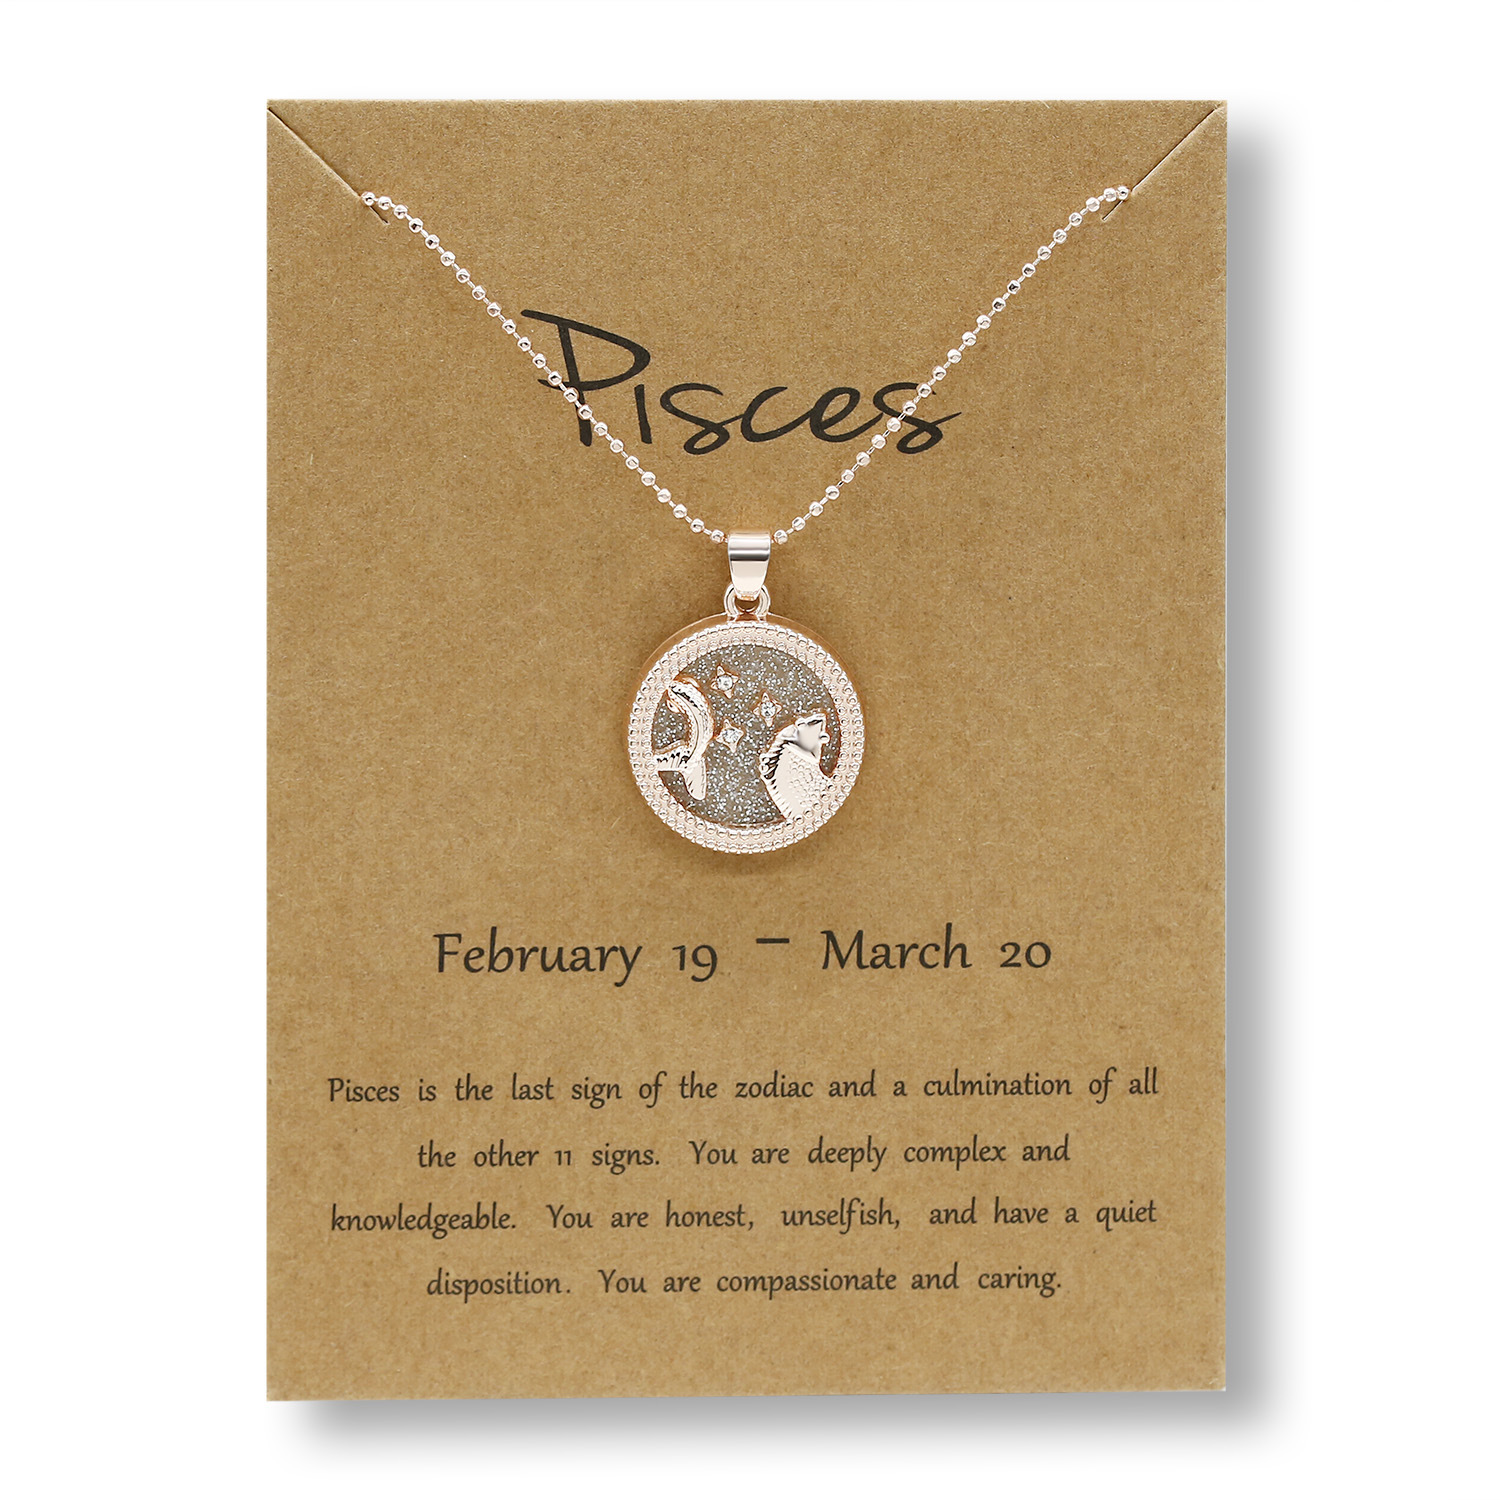 26:Pisces (Rose Gold day)